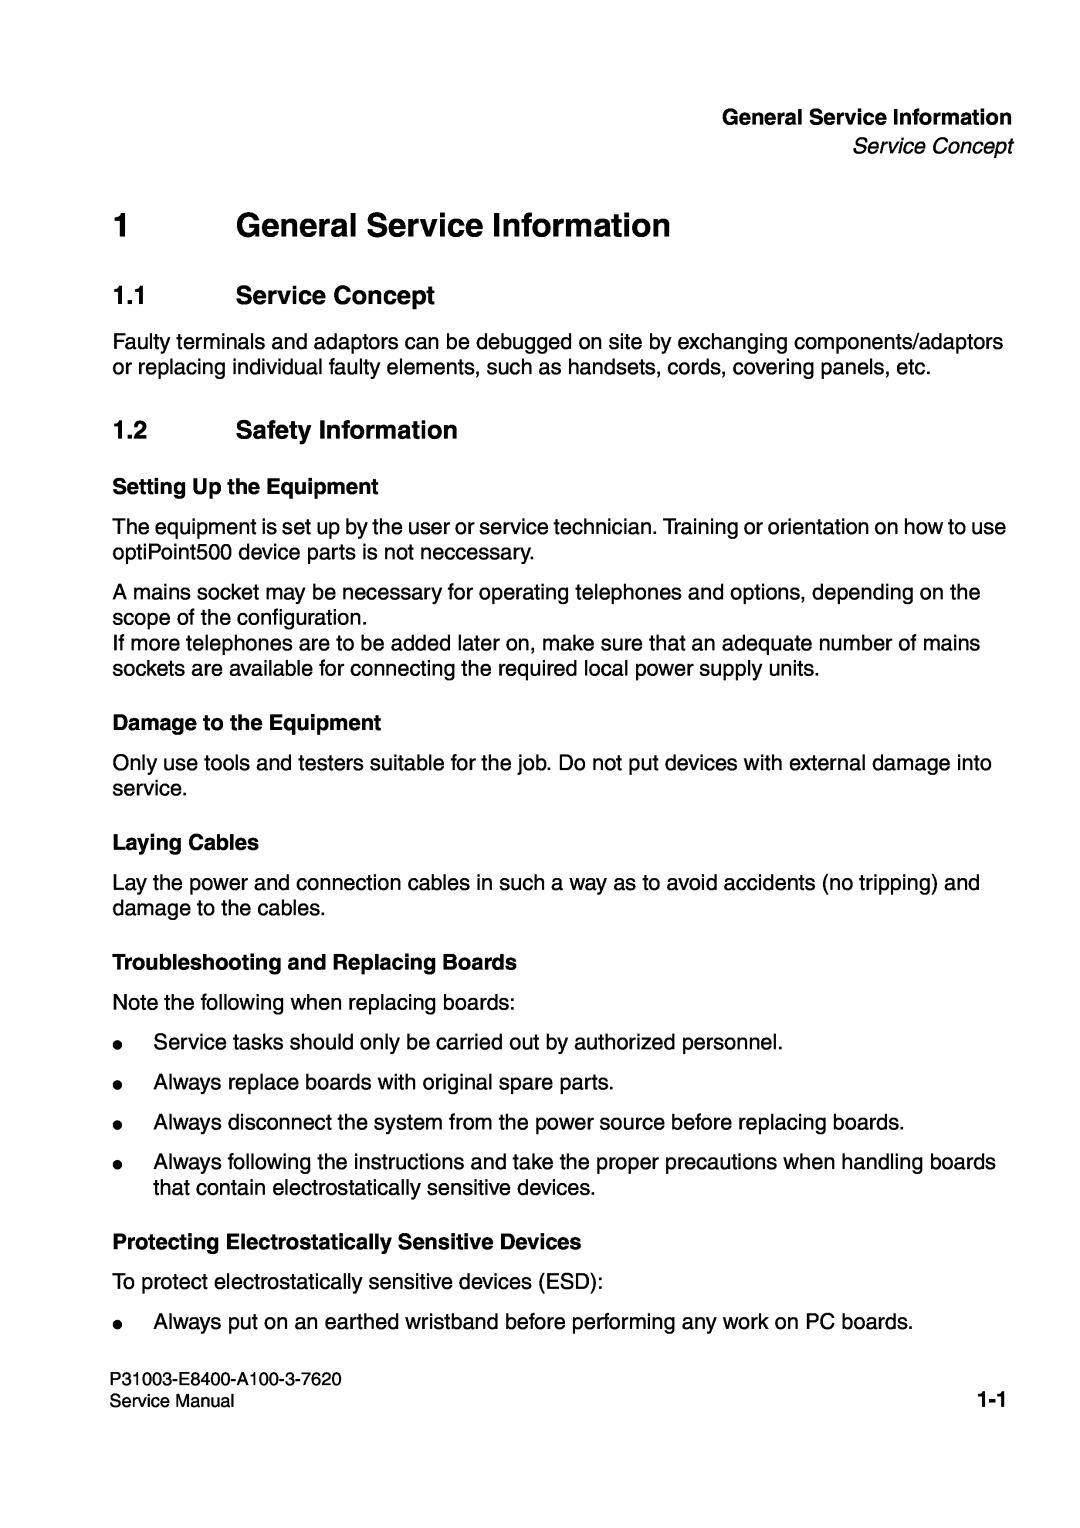 Siemens 500 General Service Information, Service Concept, Safety Information, Setting Up the Equipment, Laying Cables 